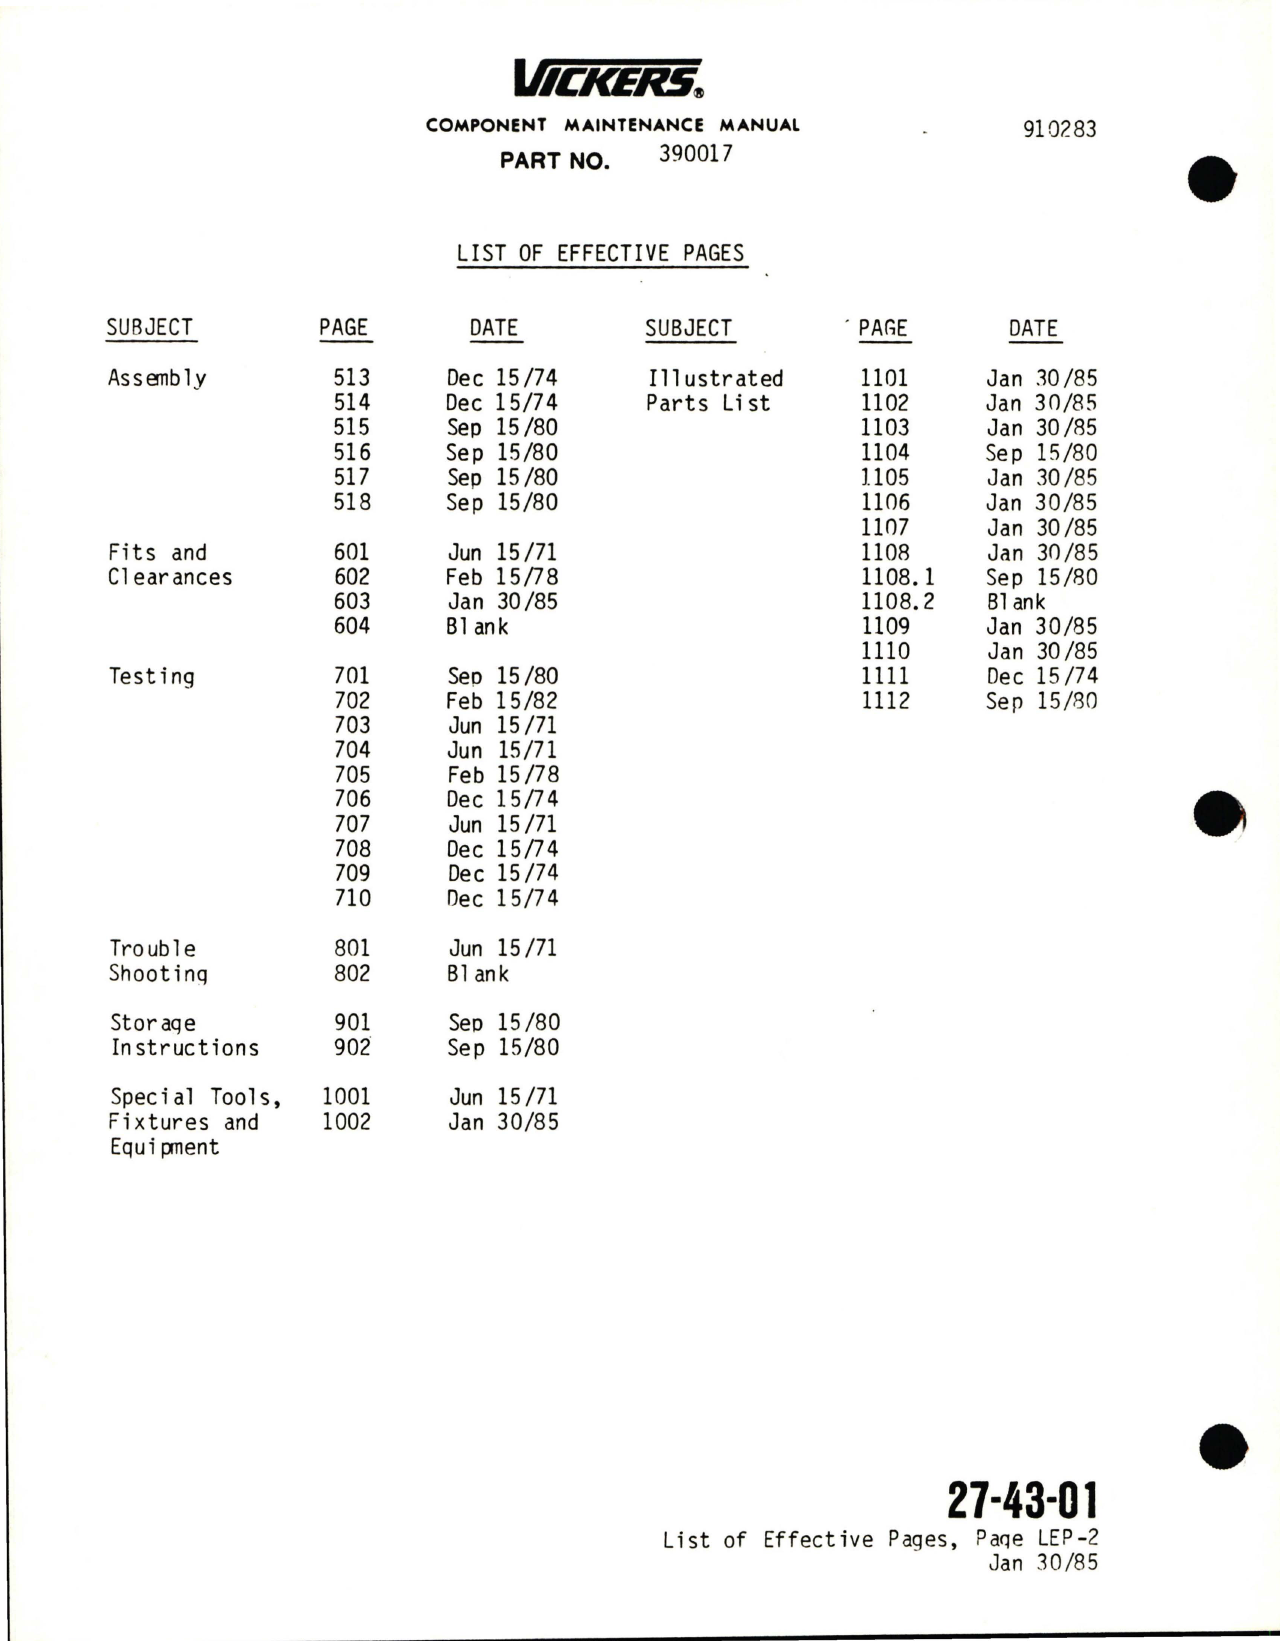 Sample page 8 from AirCorps Library document: Maintenance Manual with Illustrated Parts Breakdown for Hydraulic Motor Assembly - Model CMV3-075-1C and CMV3-075-1D